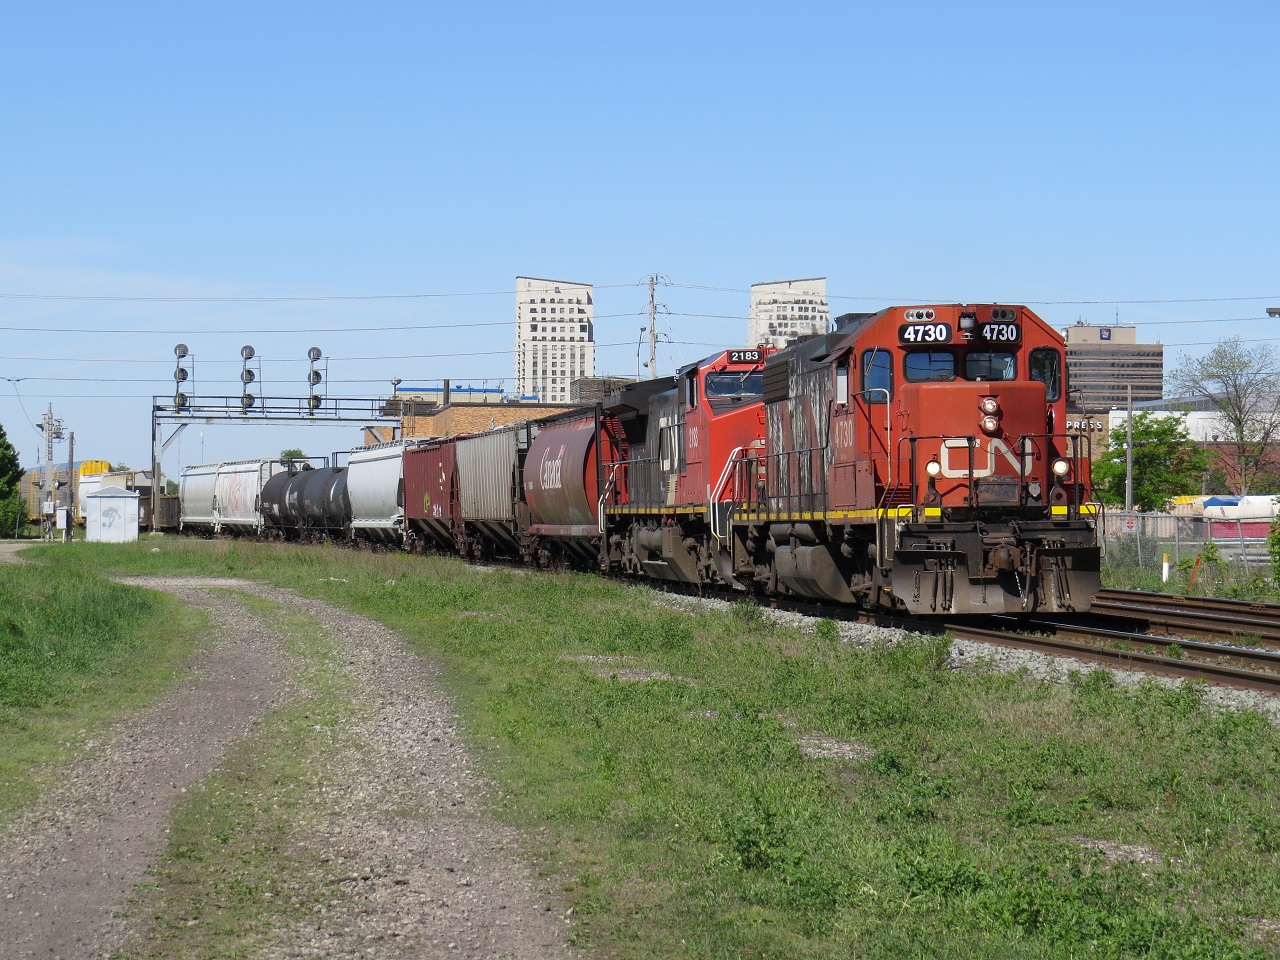 Seeeing a GP38-2 leading a main line freight in 2015 is a rare sight and especially looks good with a 6 axel locomotive trailing. I wonder how the crew felt?